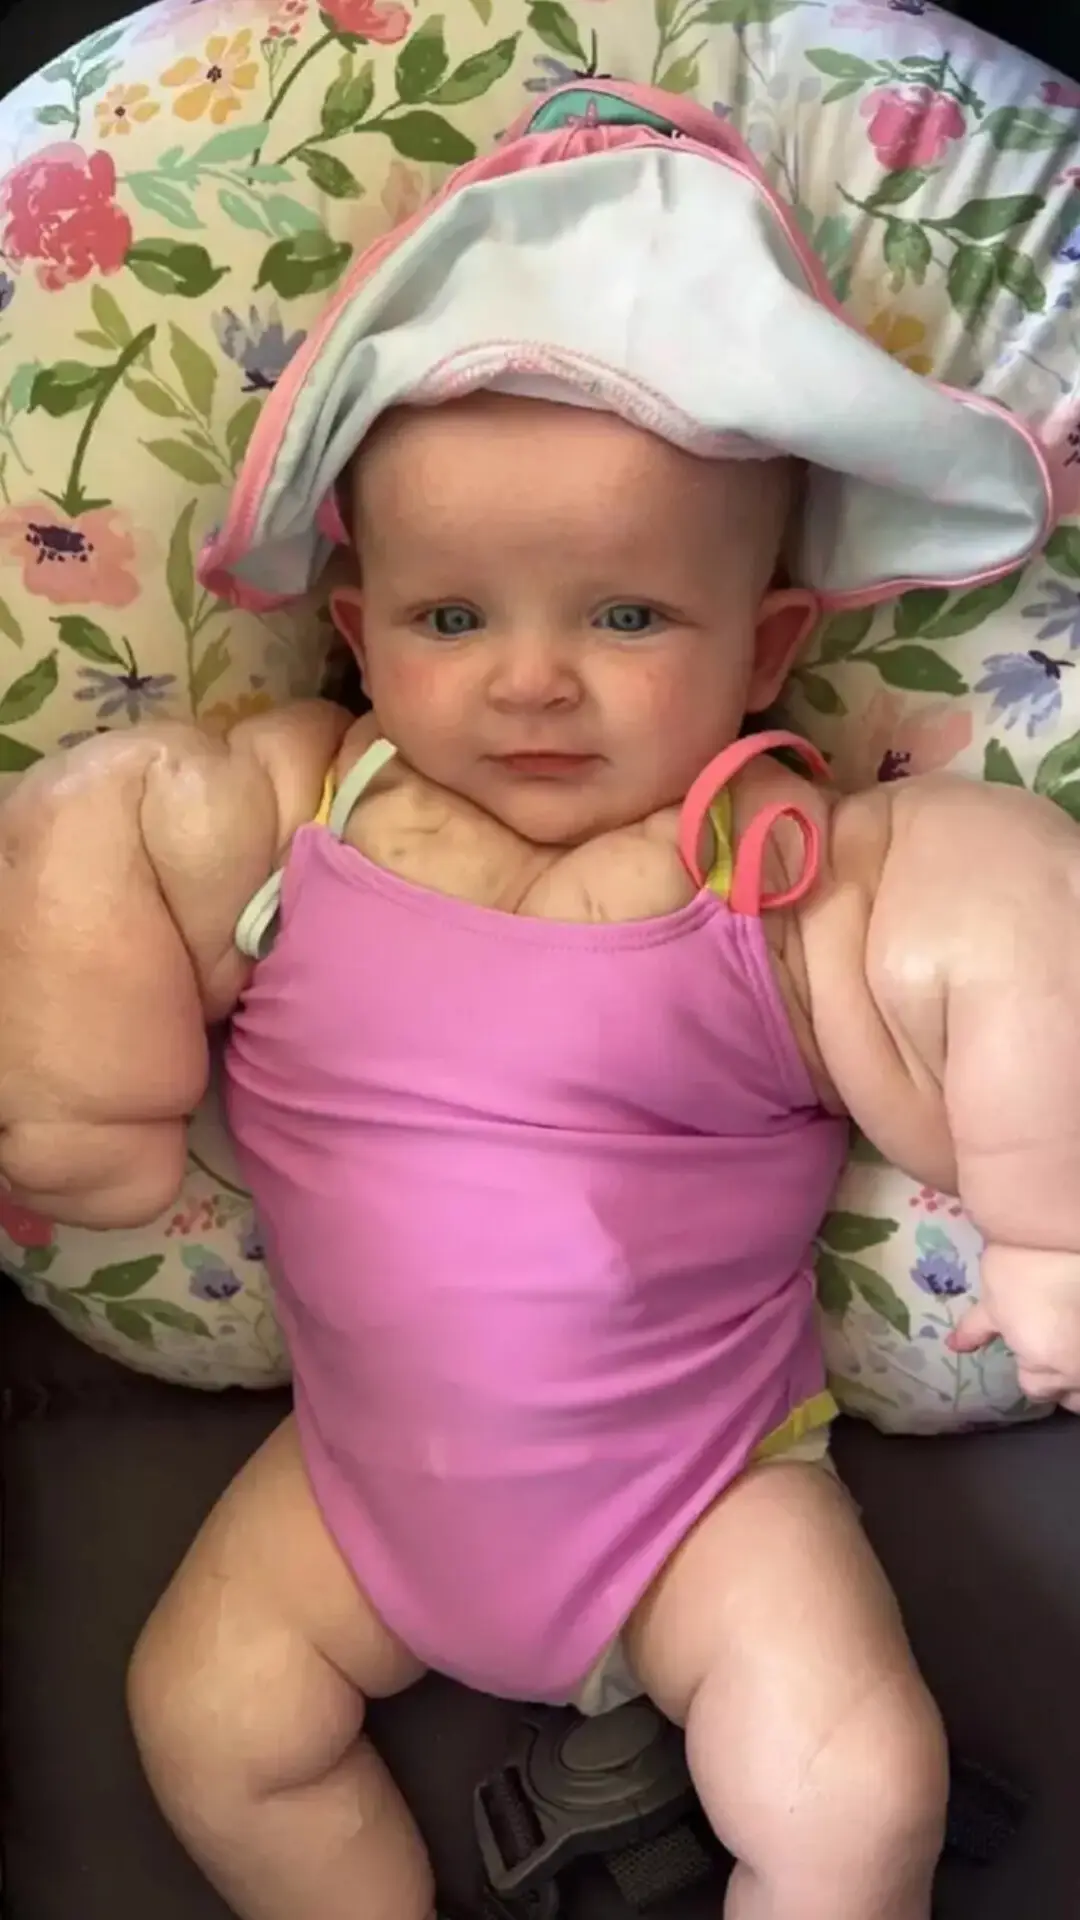 “A Heartbreaking Story of a Young Girl with the Body of a Bodybuilder” (Video.)